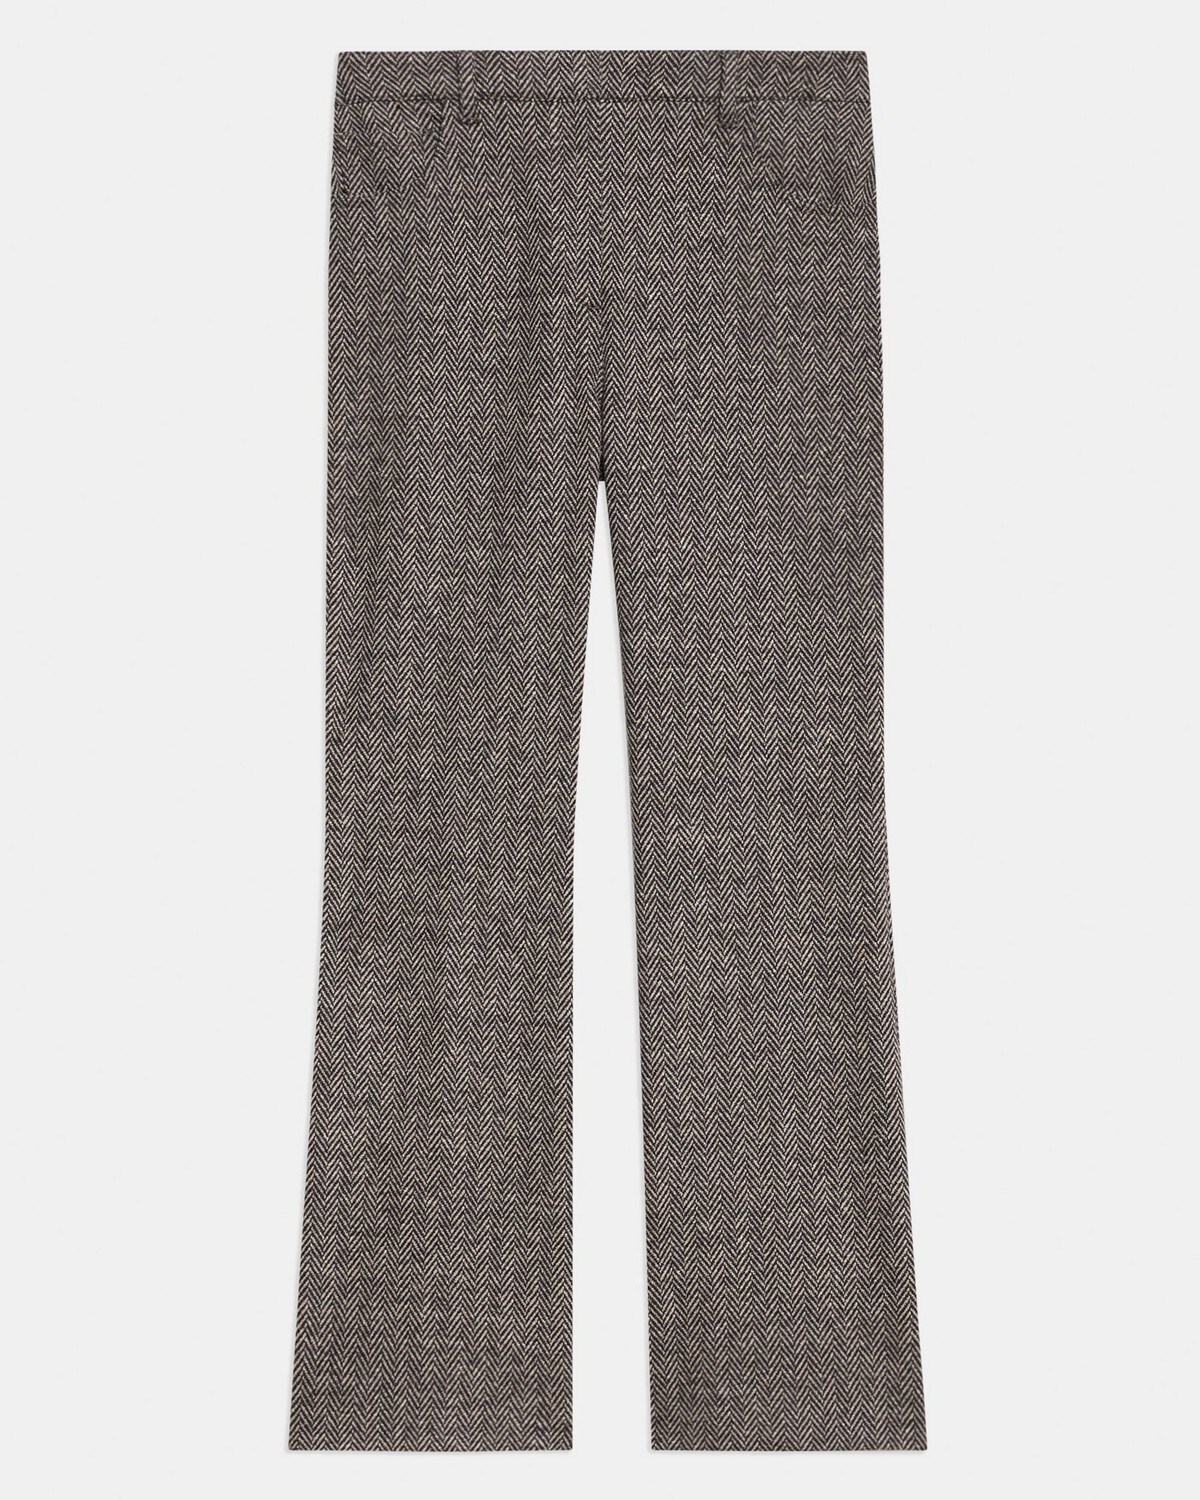 5-Pocket Flare Pant in Wool-Blend Knit